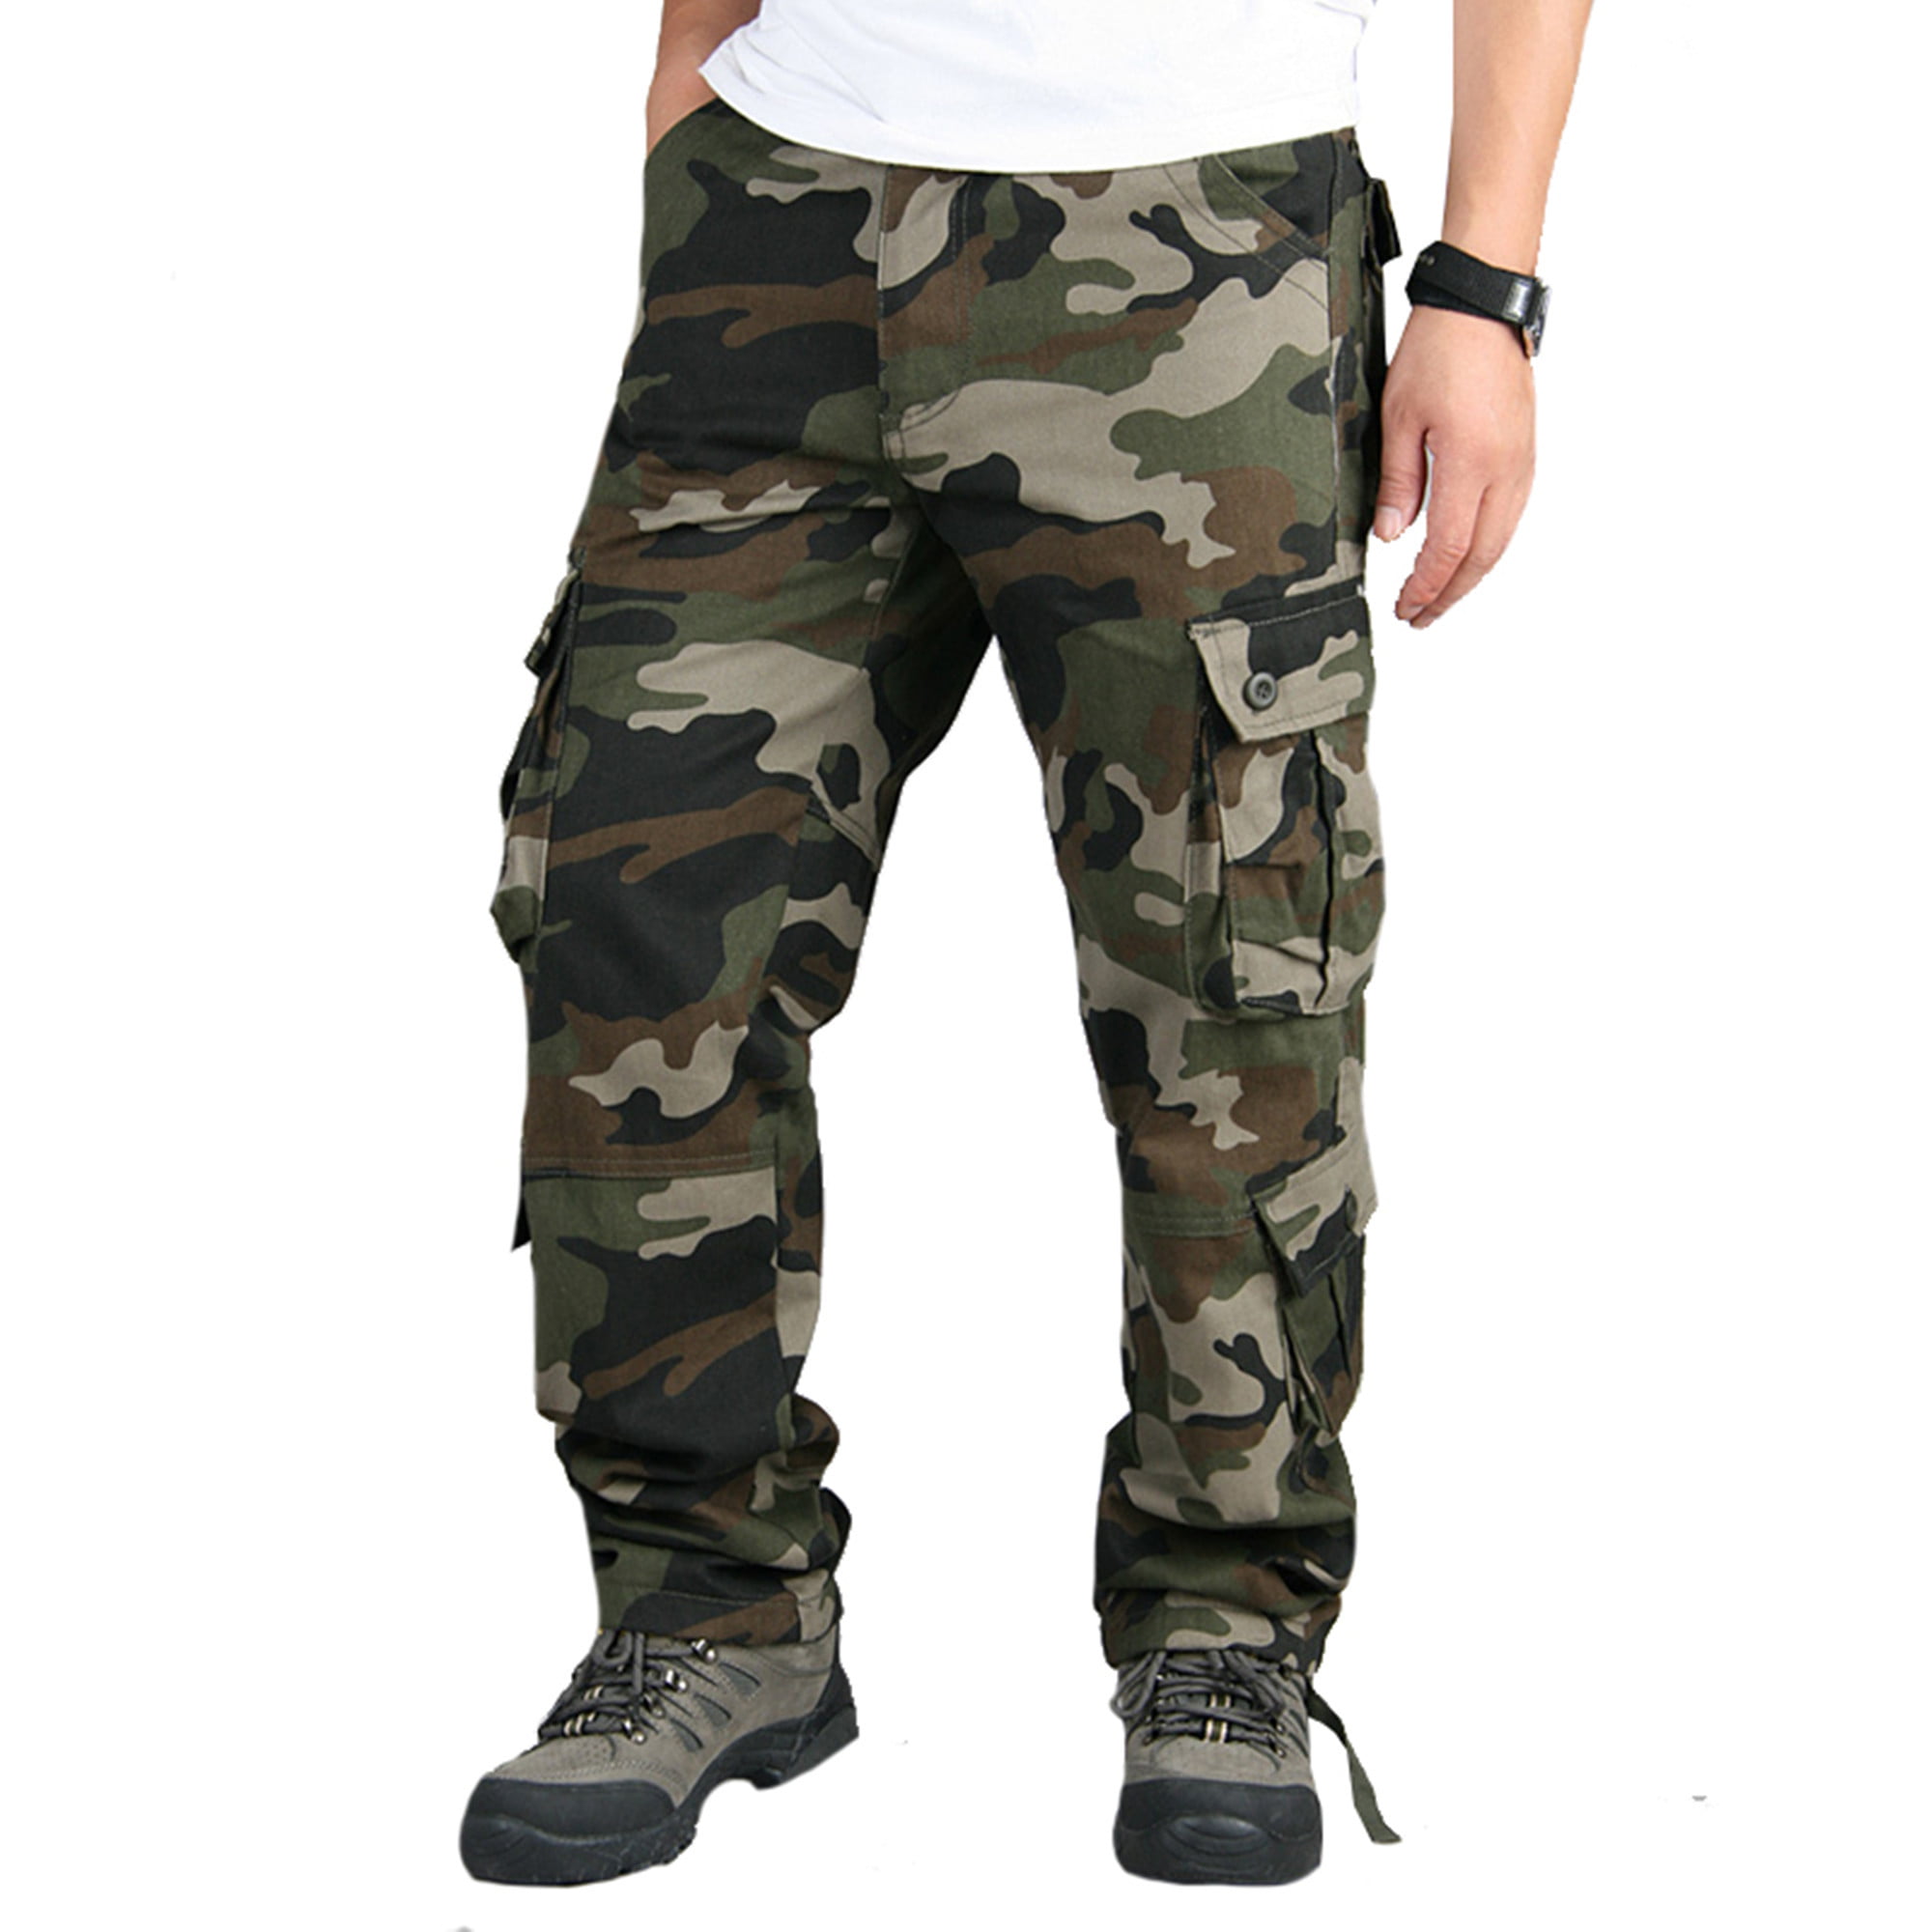 Mens Casual Camouflage Camo Military Combat Army Trousers Work Trousers Pants UK 